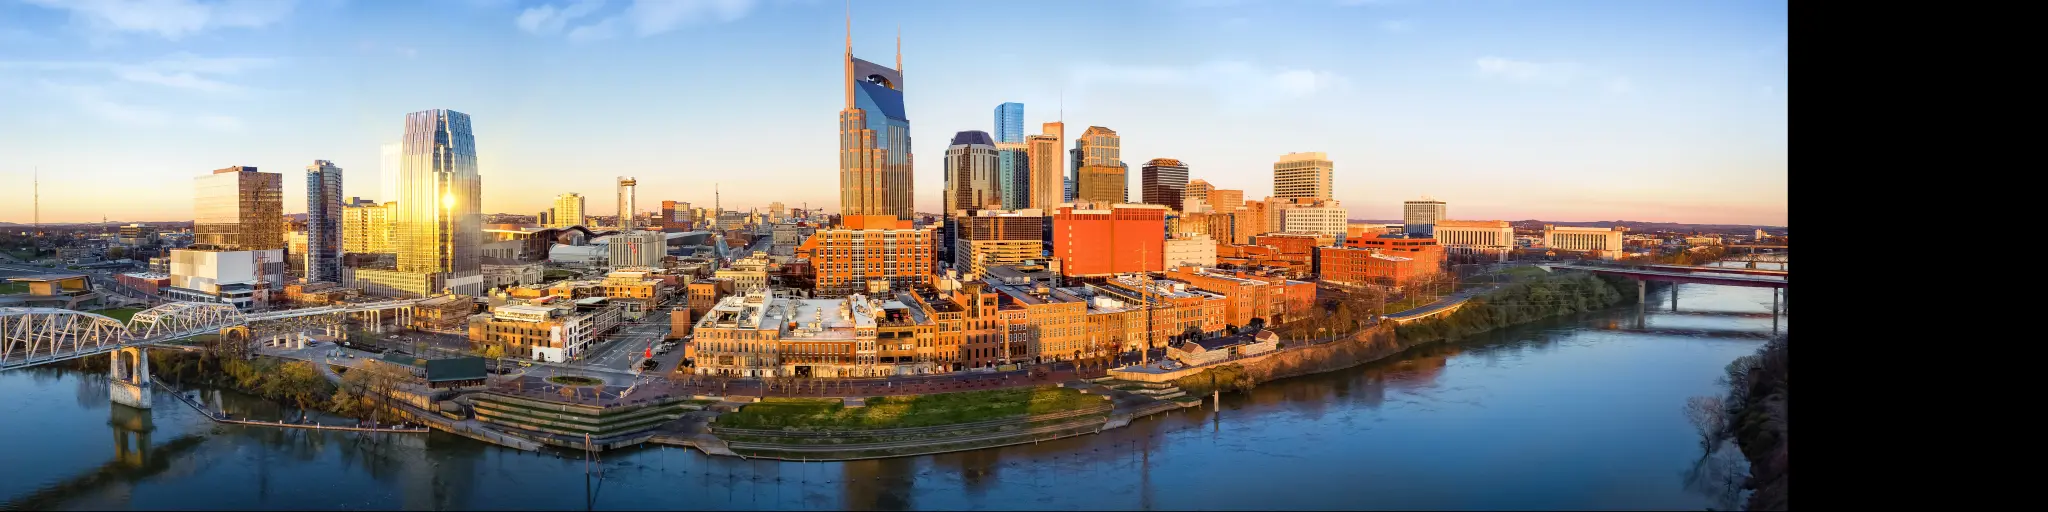 Nashville skyline at sunrise with the Cumberland River passing Downtown